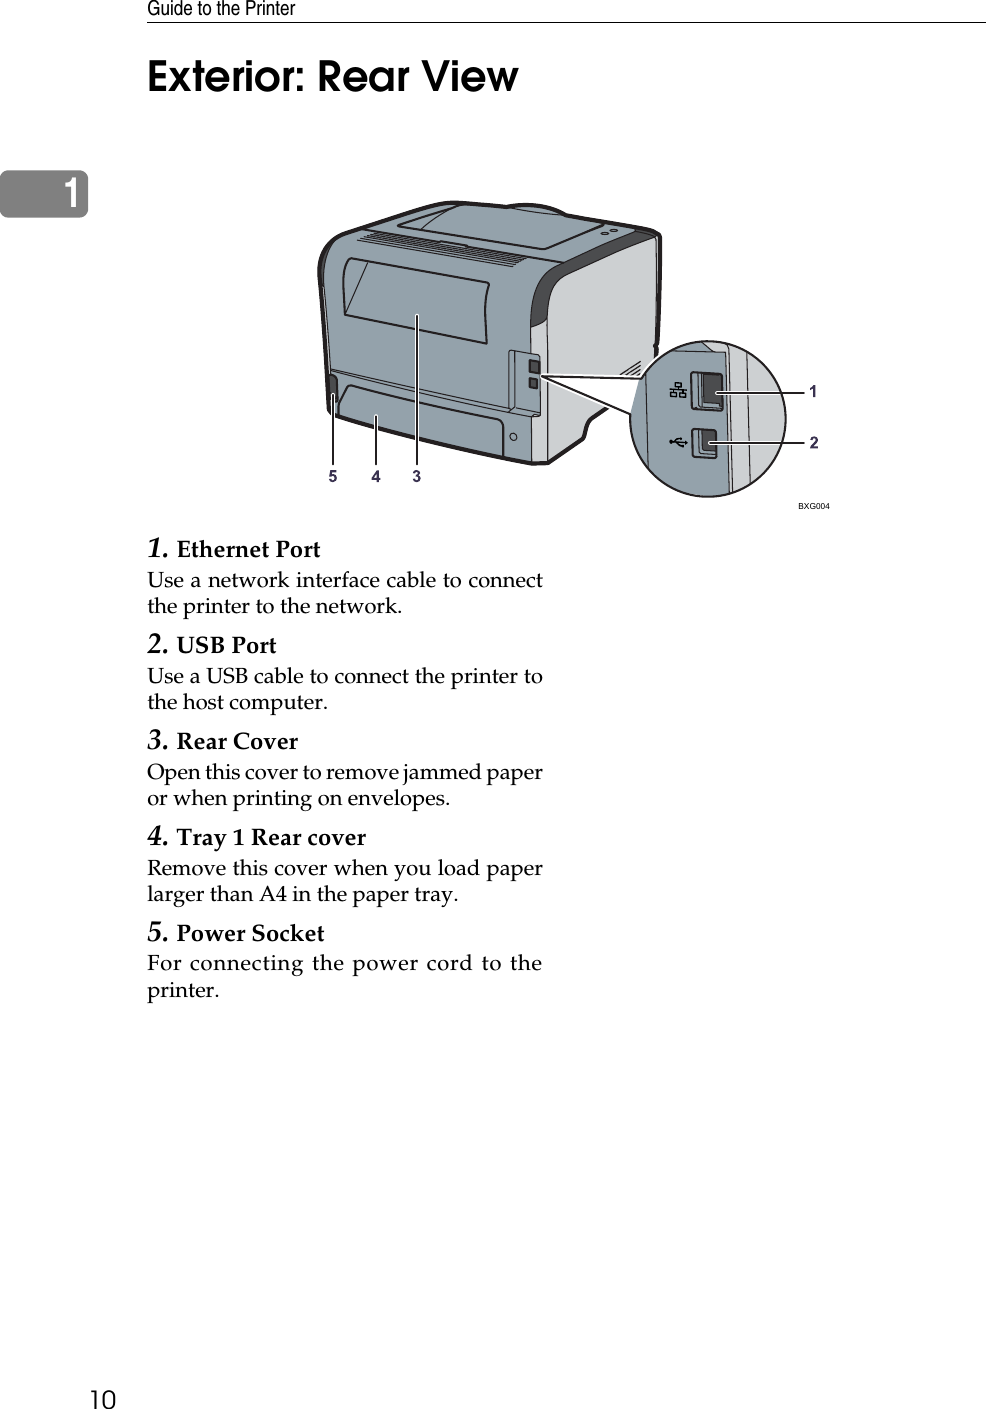 Guide to the Printer101Exterior: Rear View1. Ethernet PortUse a network interface cable to connectthe printer to the network.2. USB PortUse a USB cable to connect the printer tothe host computer.3. Rear CoverOpen this cover to remove jammed paperor when printing on envelopes.4. Tray 1 Rear coverRemove this cover when you load paperlarger than A4 in the paper tray.5. Power SocketFor connecting the power cord to theprinter.BXG004 